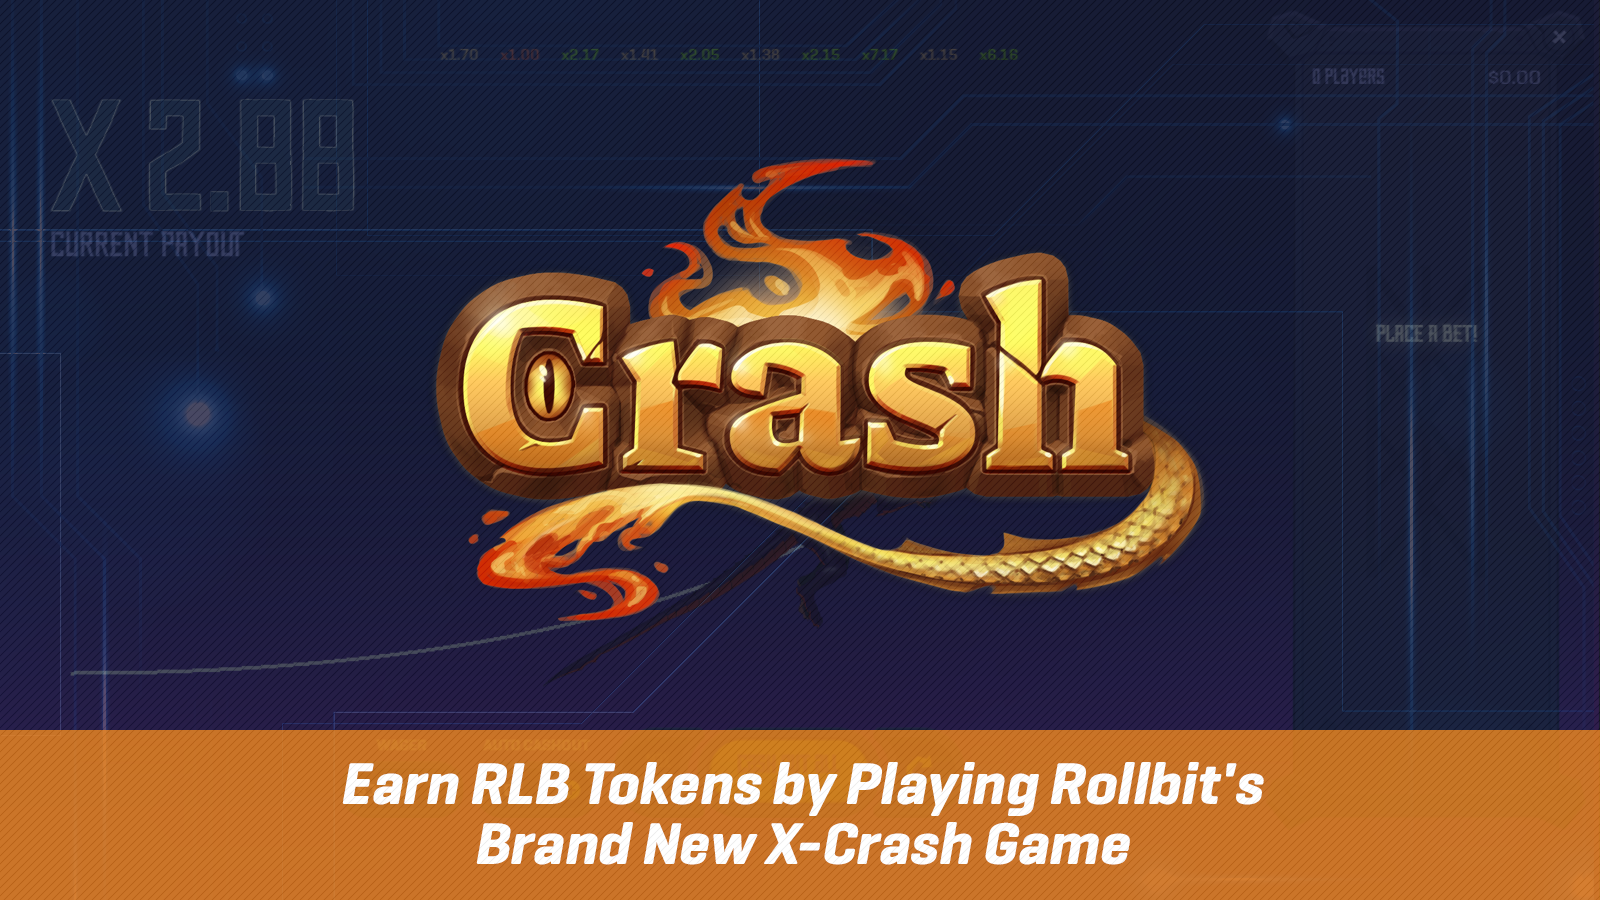 Earn RLB Tokens by Playing Rollbit's Brand New X-Crash Game